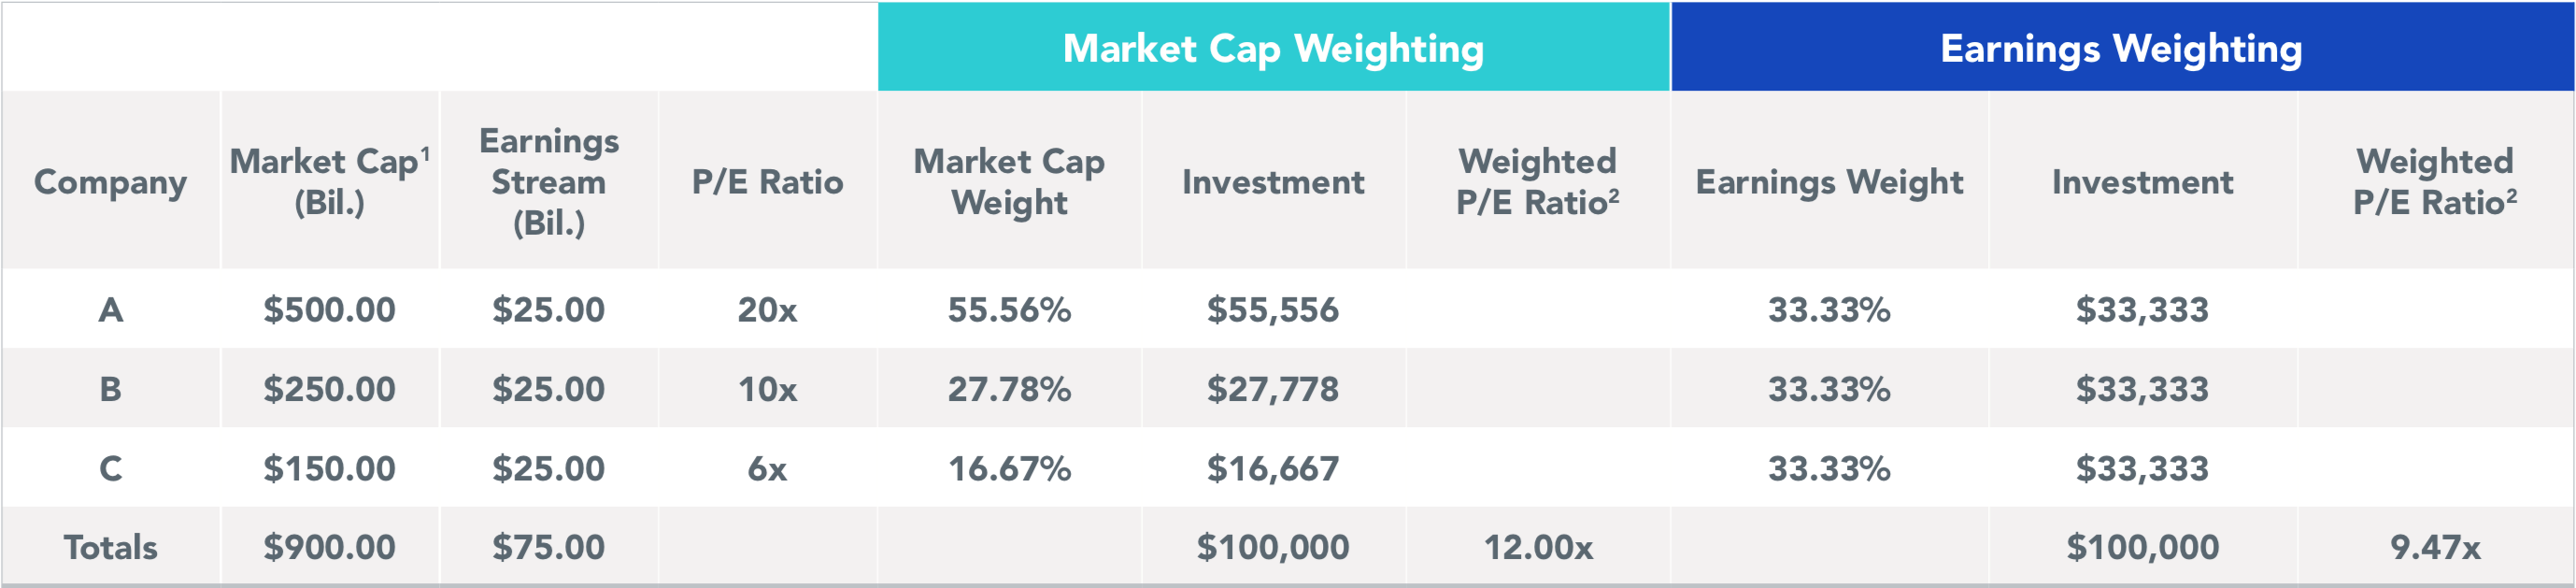 How We Weight by Earnings